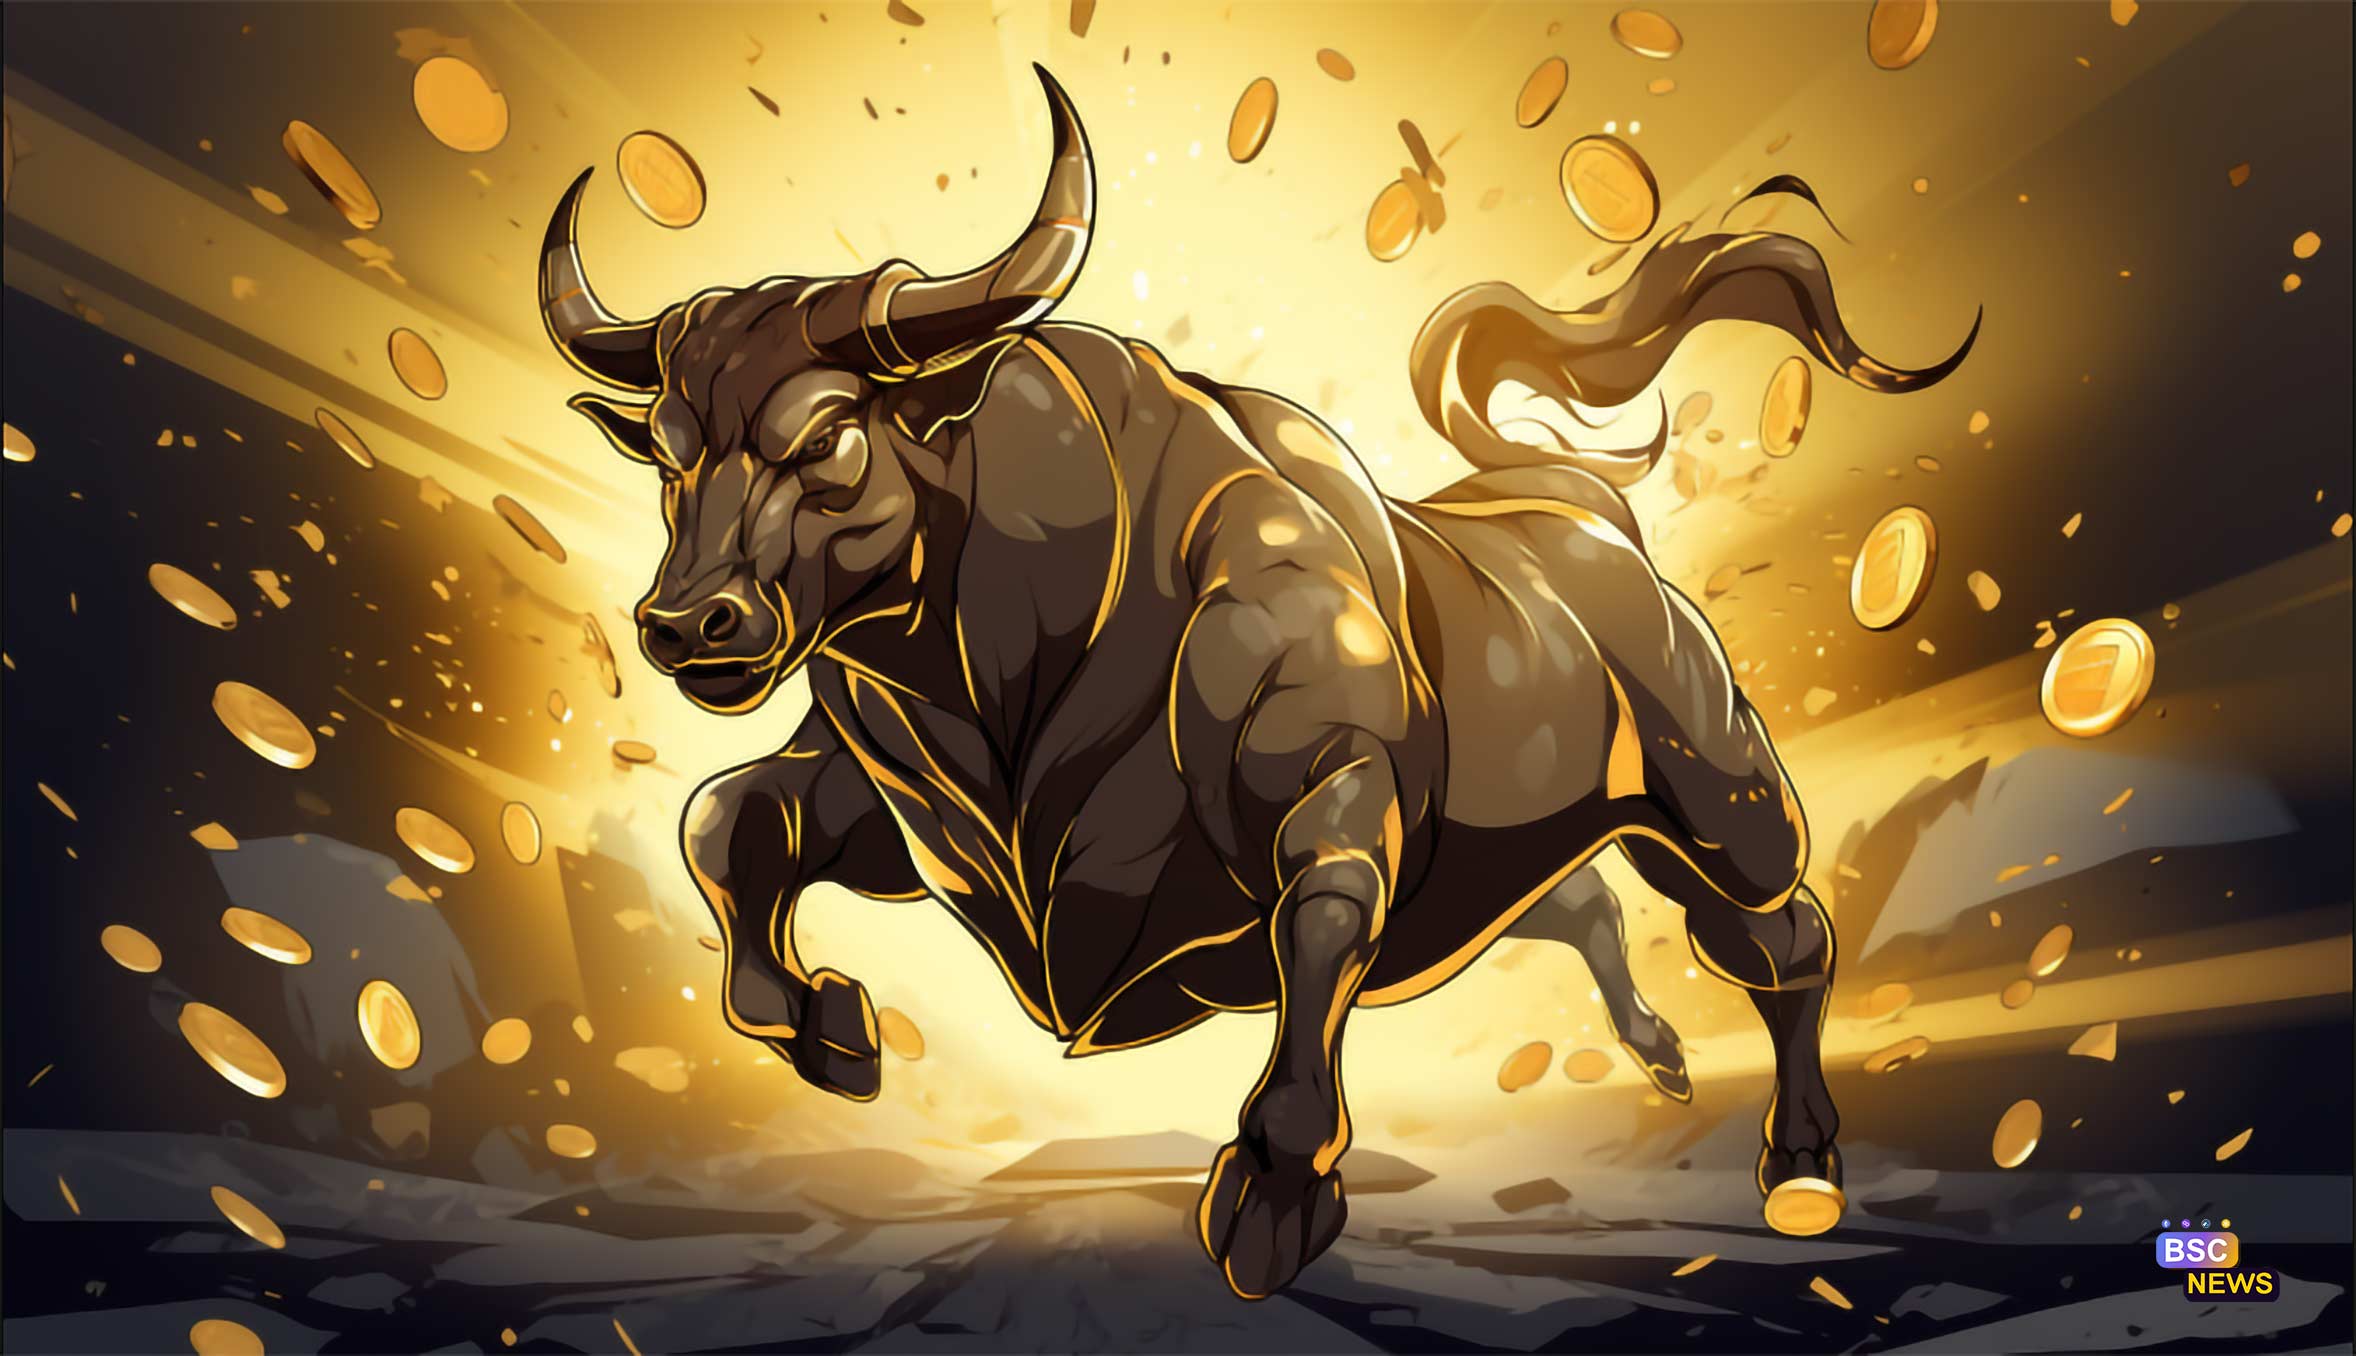 3 Charts That Show How the Crypto Bull Market Is Just Getting Started